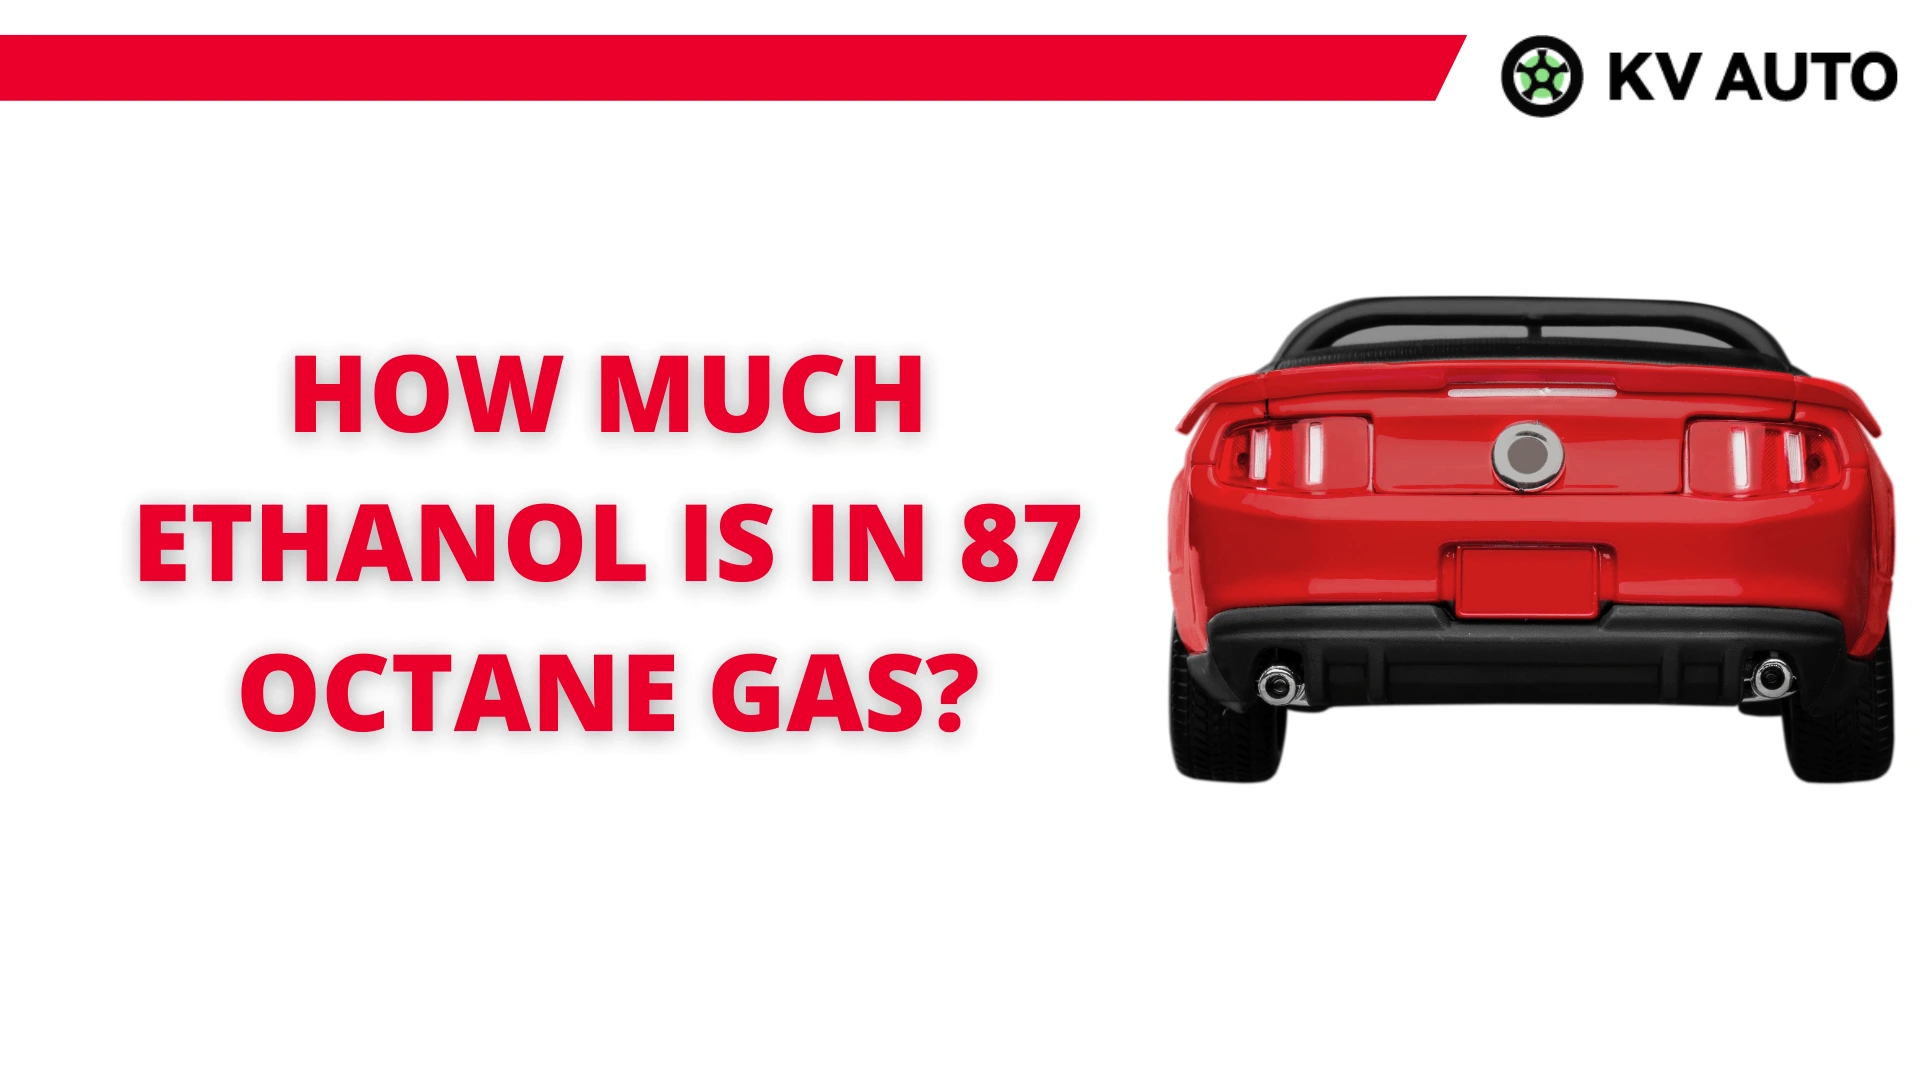 How Much Ethanol is in 87 Octane Gas? Let's See